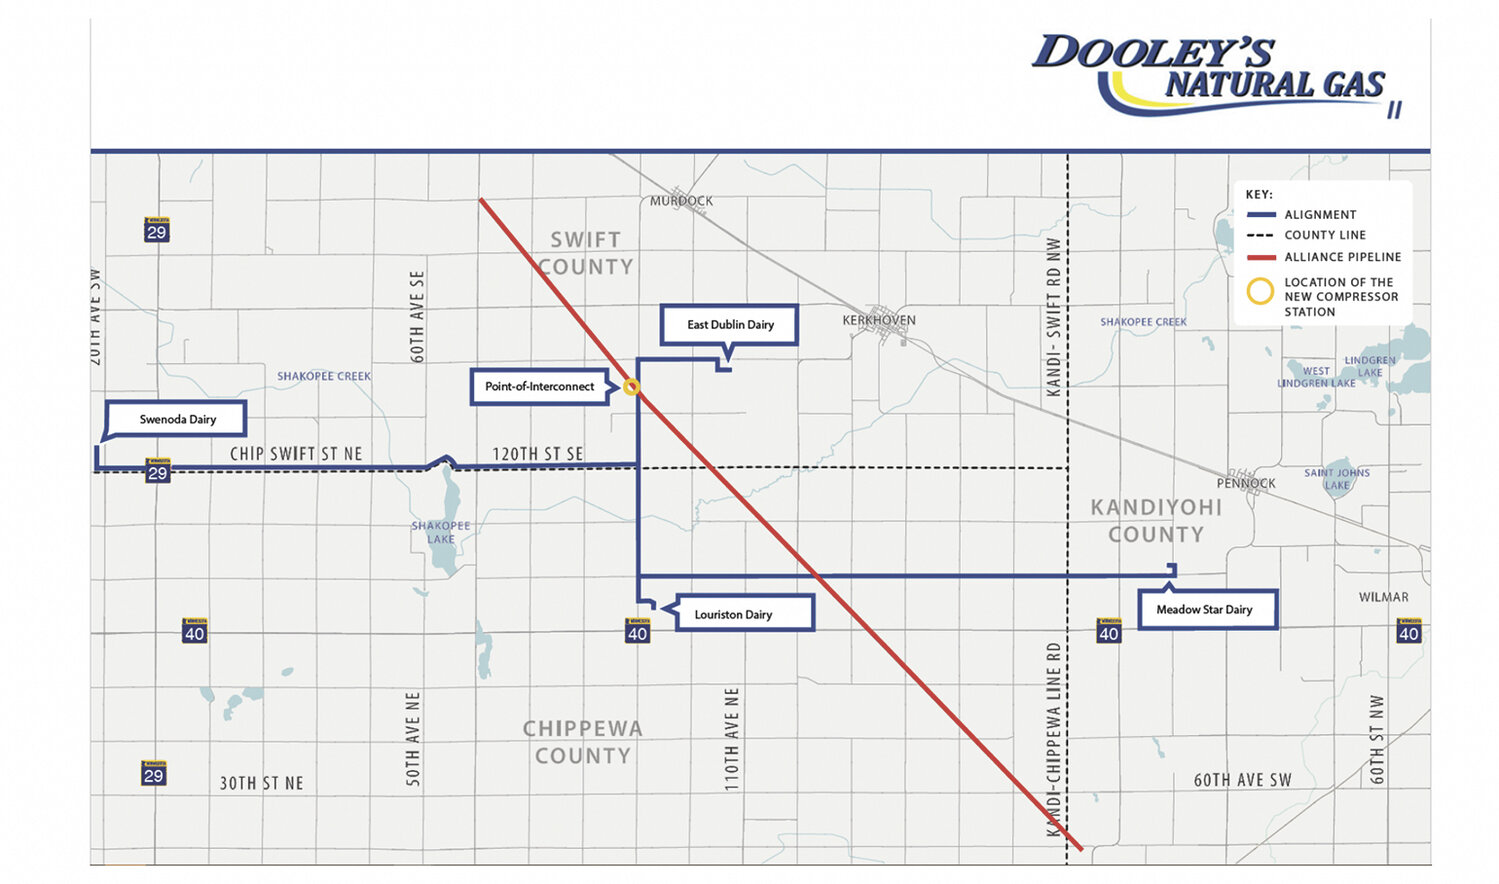 This map shows the locations of a natural gas pipeline system proposed by Dooley’s Natural Gas. The pipeline would connect renewable natural gas from manure biodigesters at four Riverview LLP sites in west central Minnesota to a planned compression station near Murdock, Minnesota, where it would be injected into the existing Alliance Transmission Pipeline.